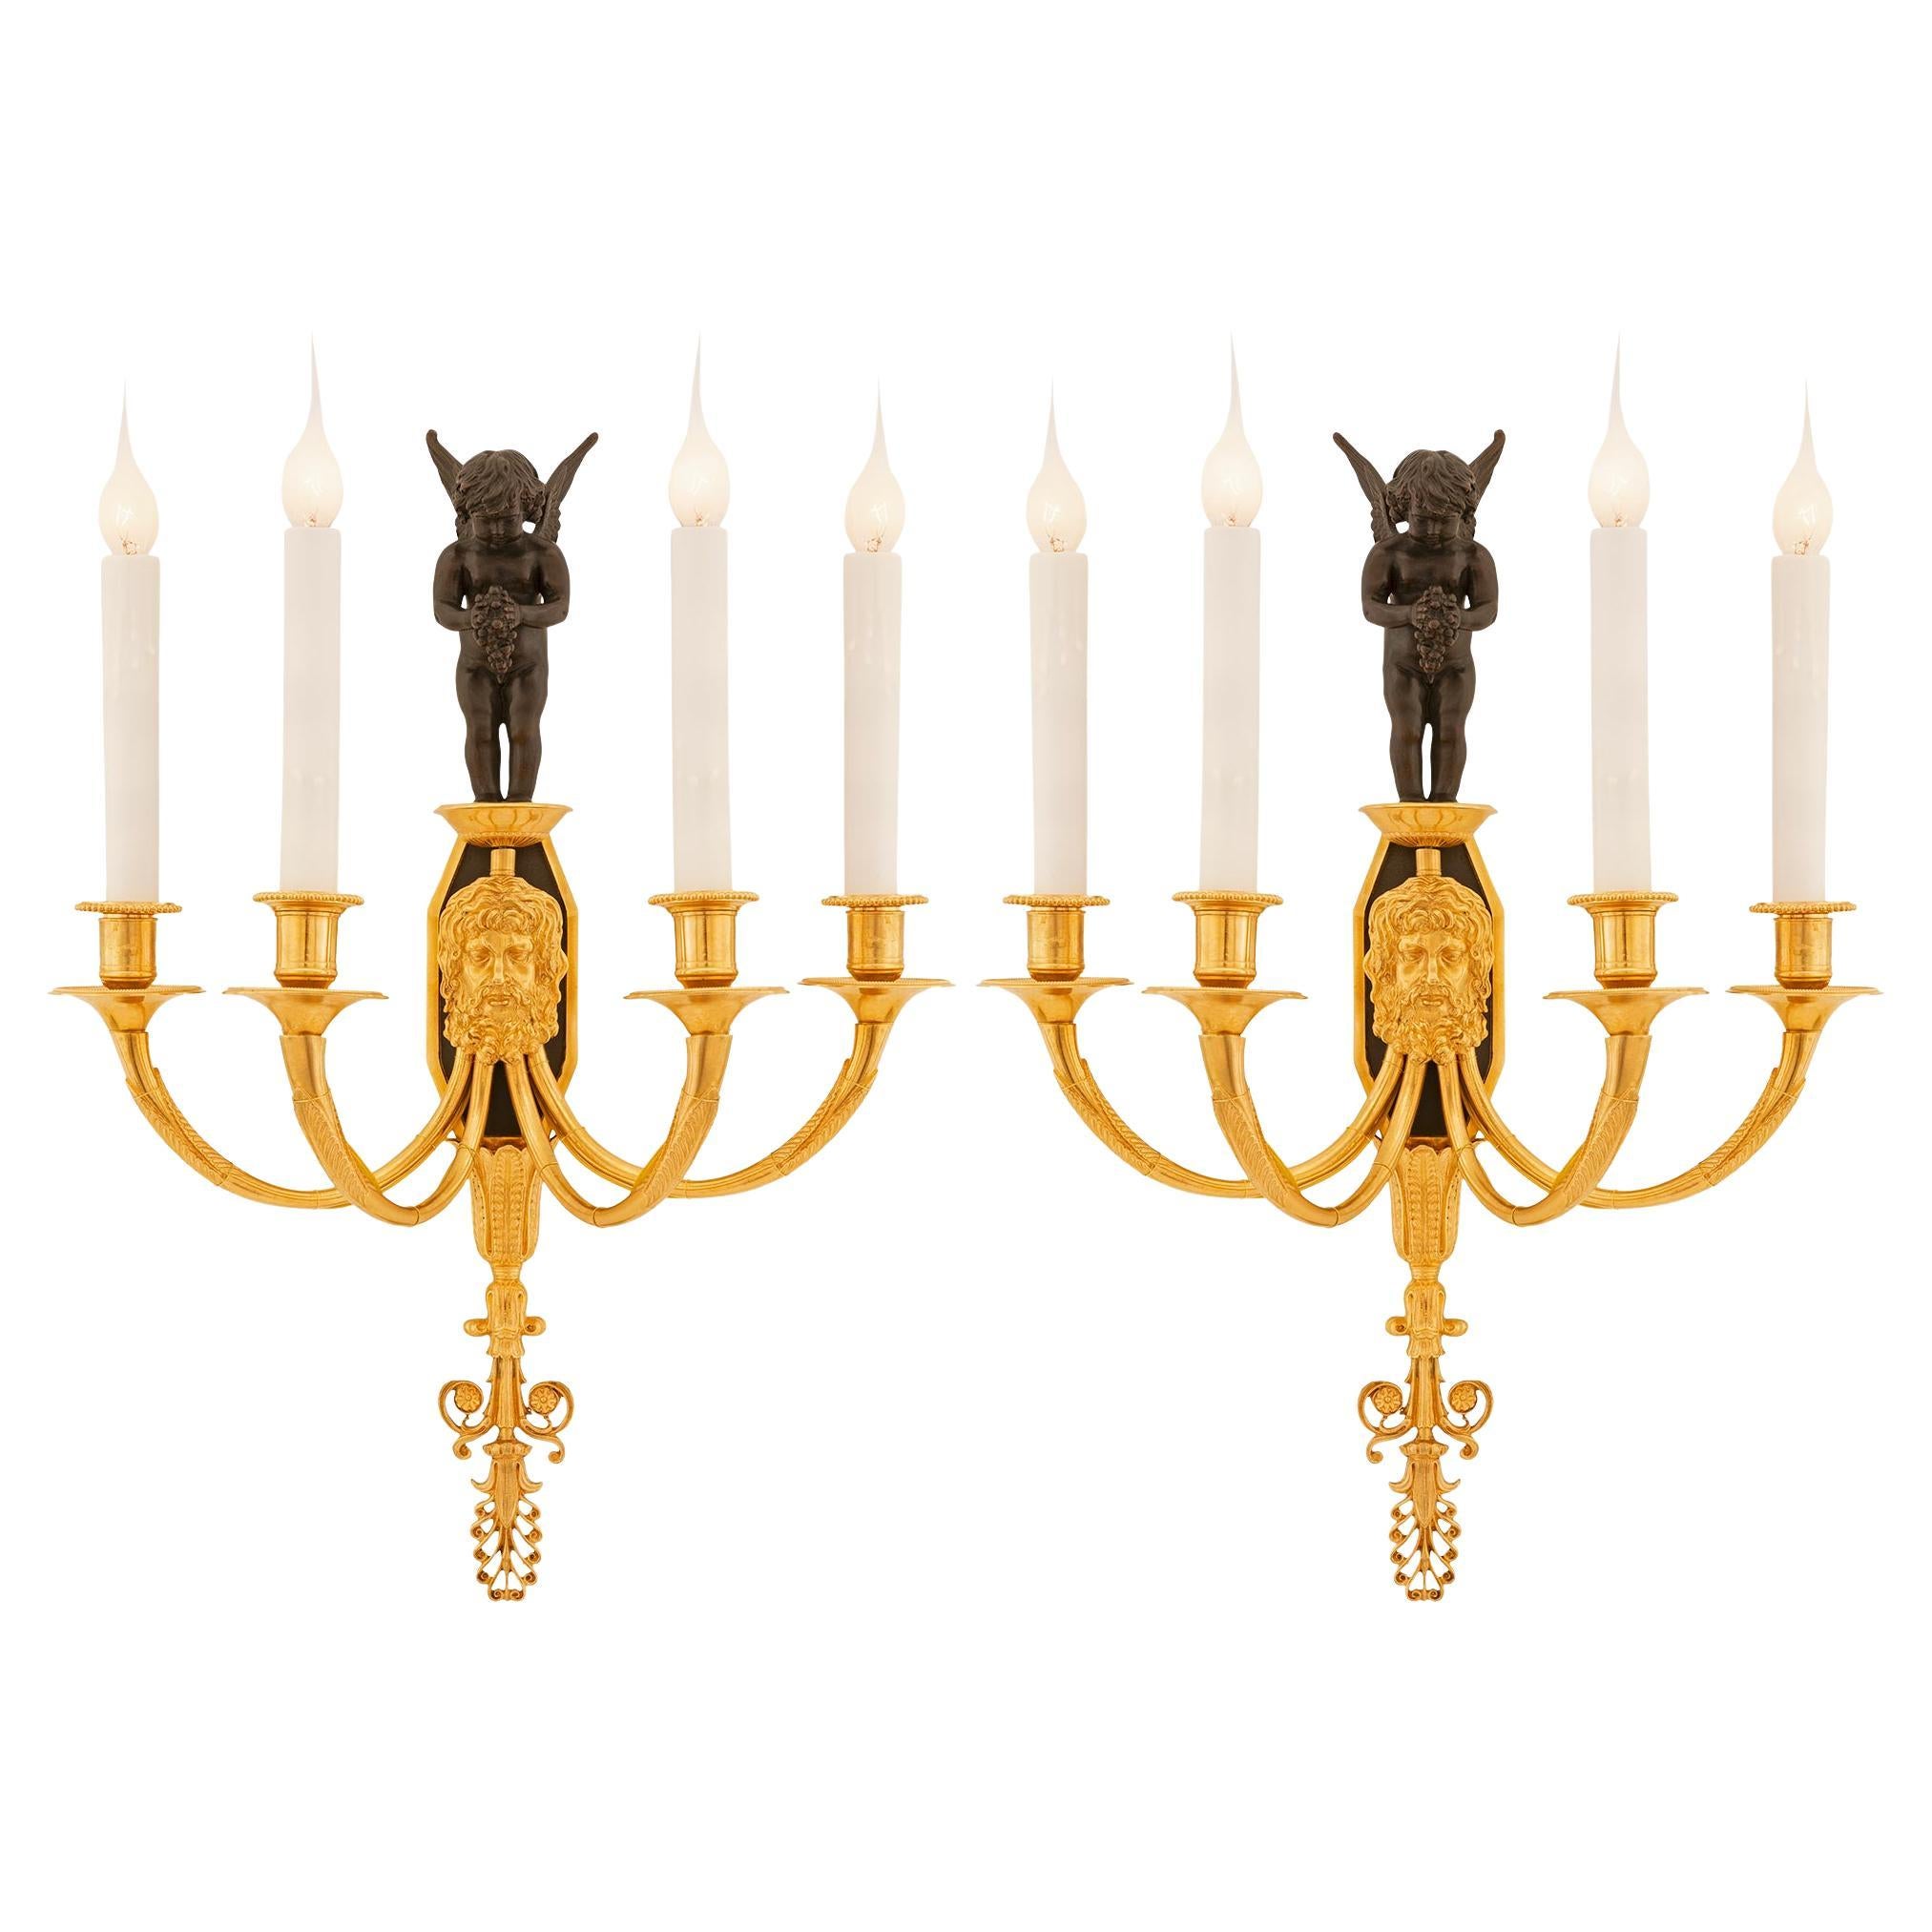 Pair of French 19th Century Neoclassical St. Patinated Bronze and Ormolu Sconces